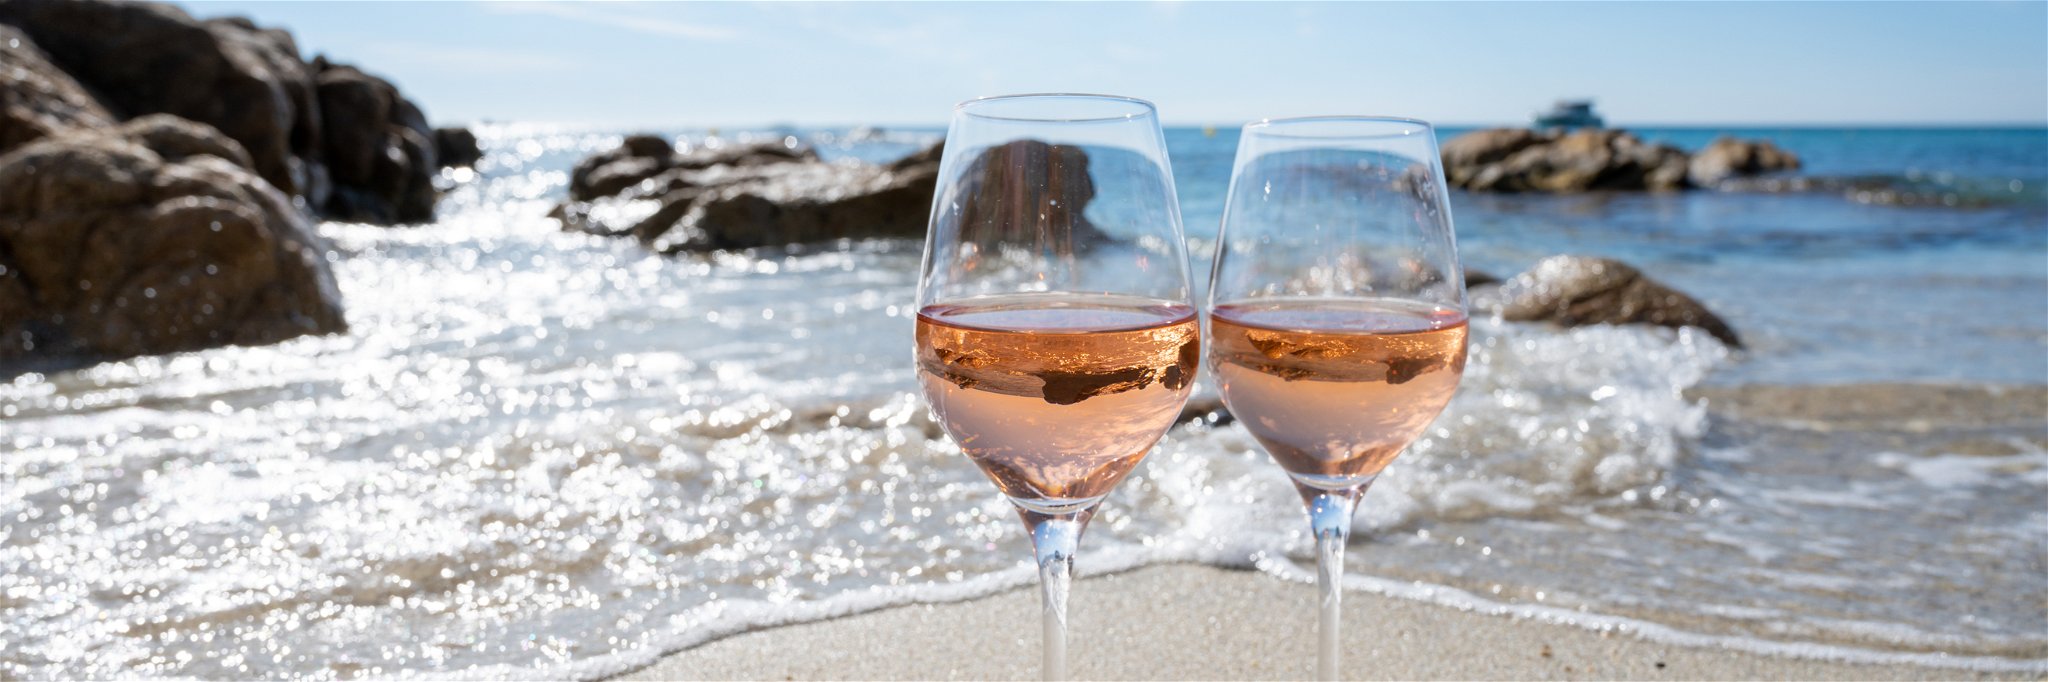 Rosé wines come in a range of pink hues.